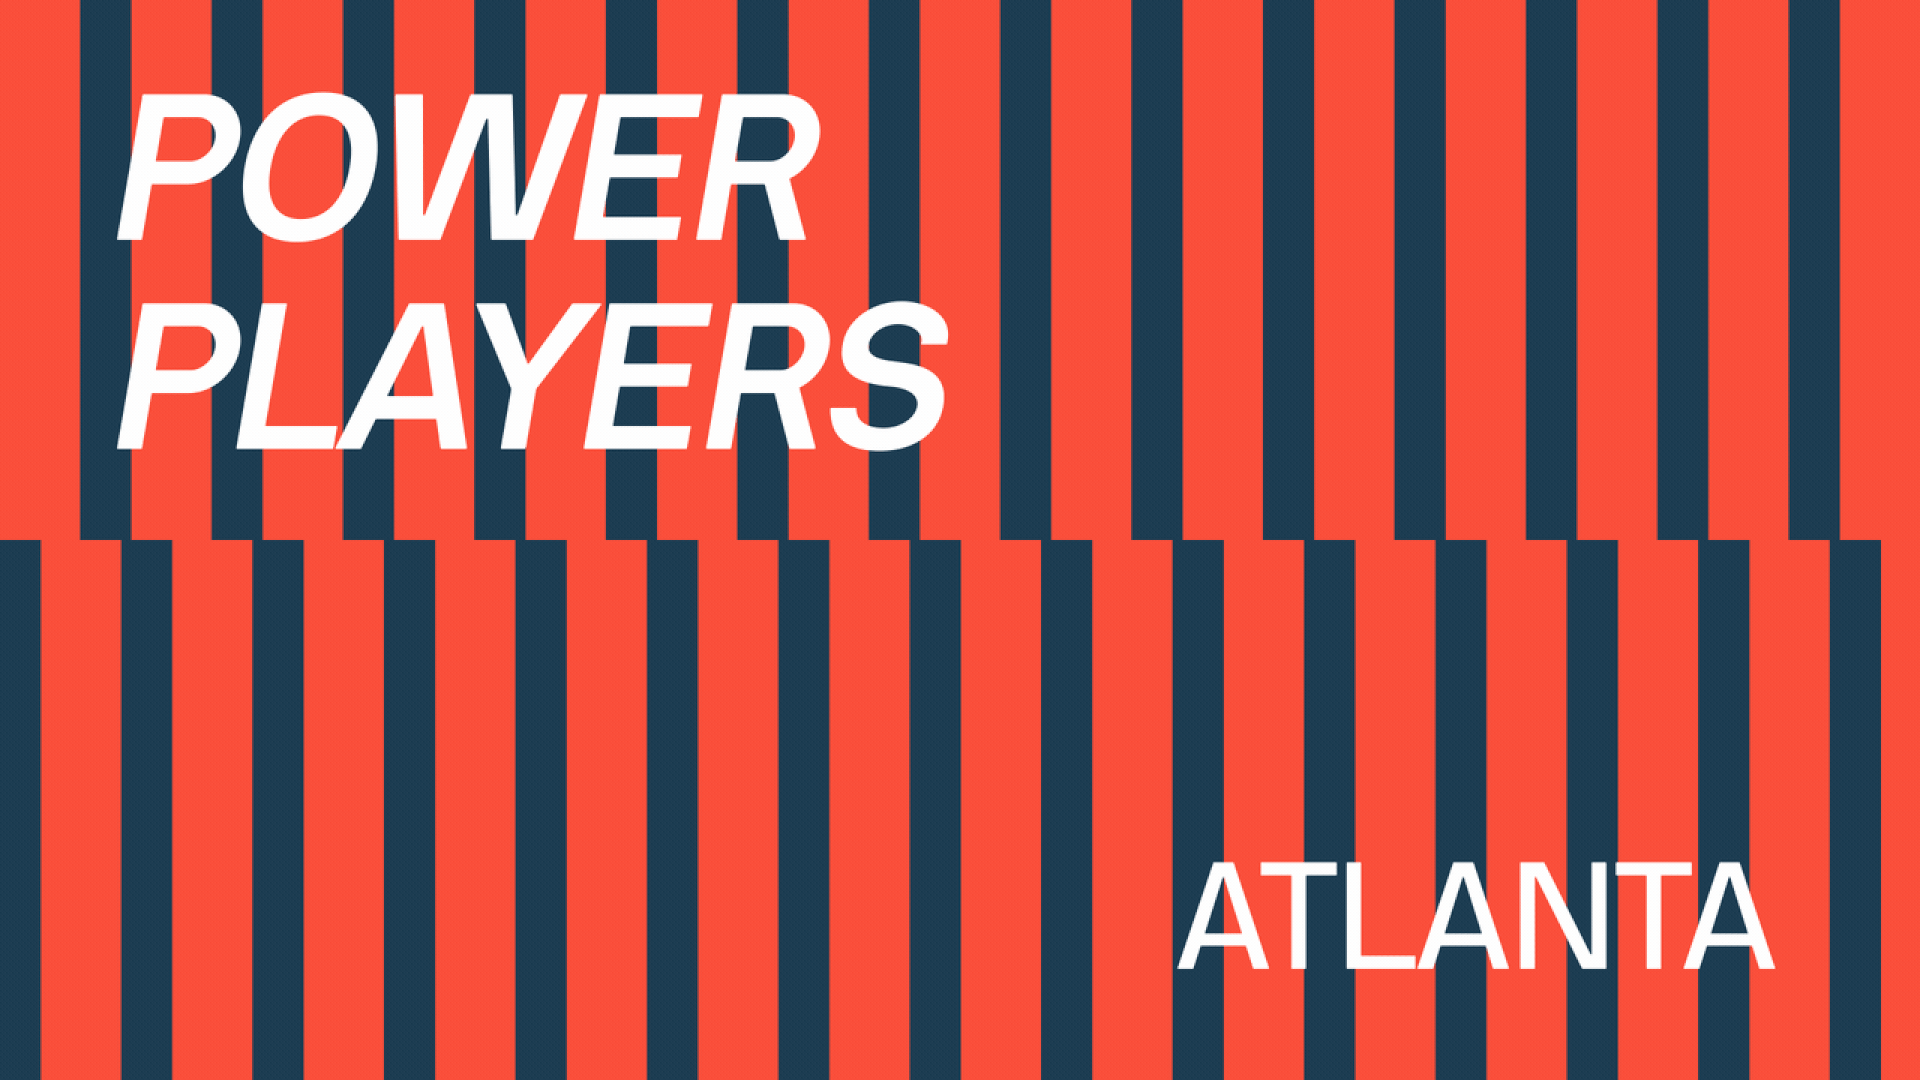 Illustration of two rows of dominos falling with text overlaid that reads Power Players Atlanta.